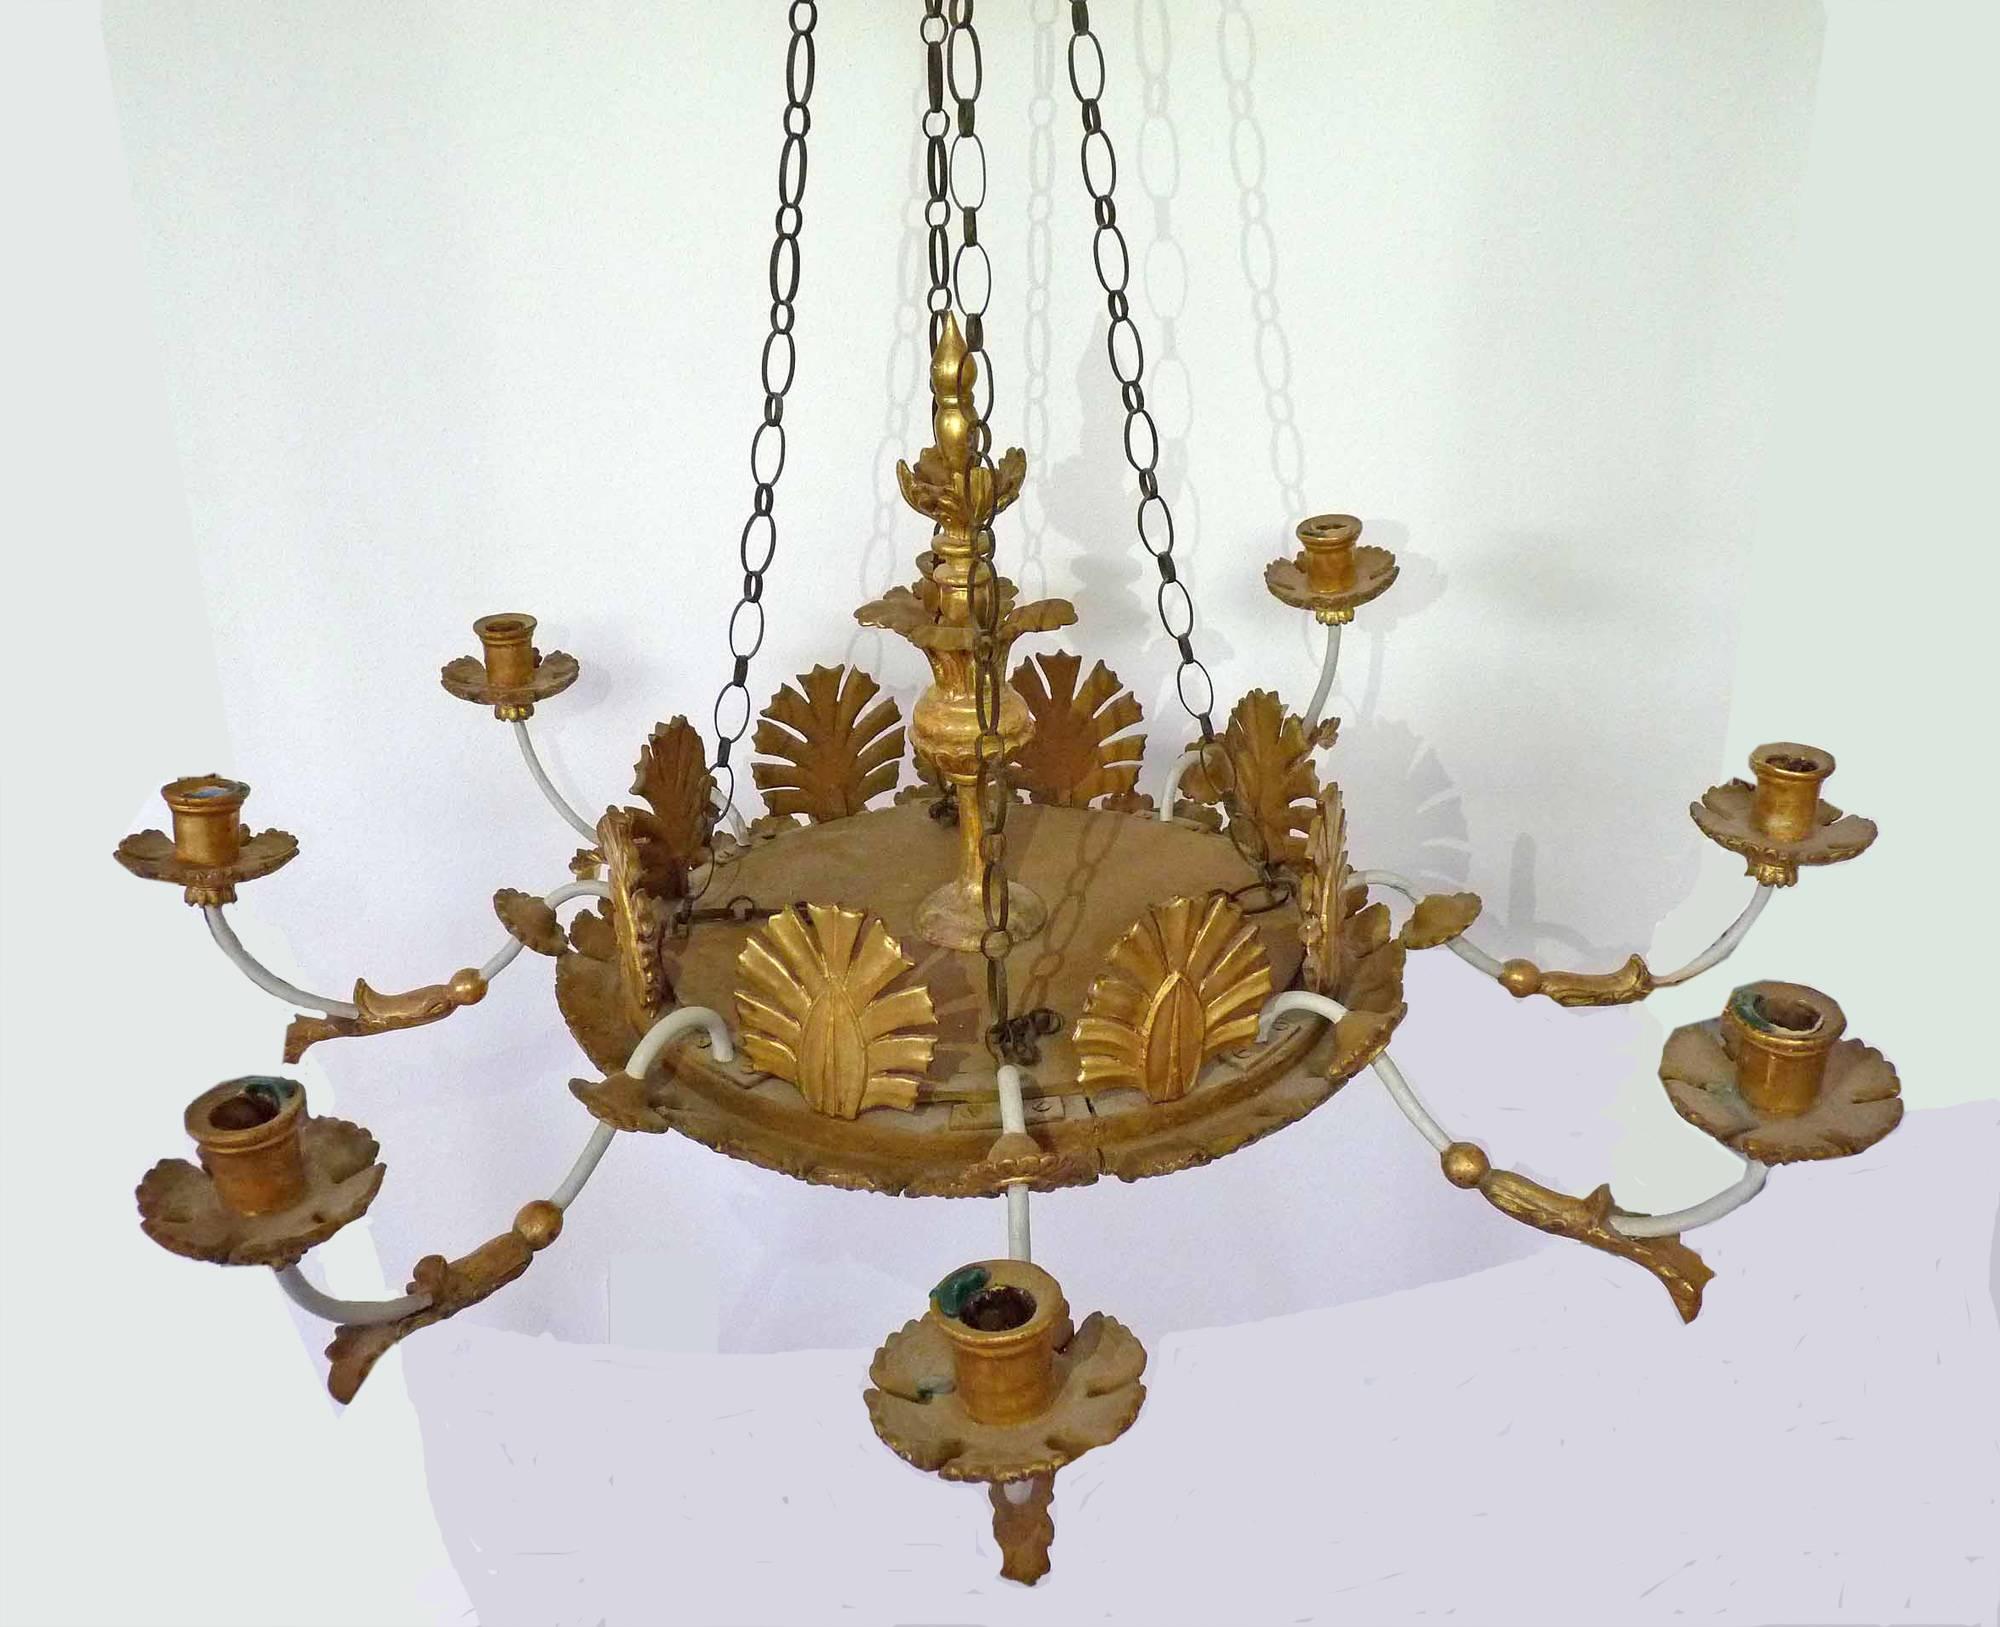 The lamp is made in style of an antique oil lamp and can be equipped with eight candles.

Provenance: Castle of Lucklum, Northern Germany.

Very nice original condition.
This item is a 100% genuine original artwork from classicism period.
It